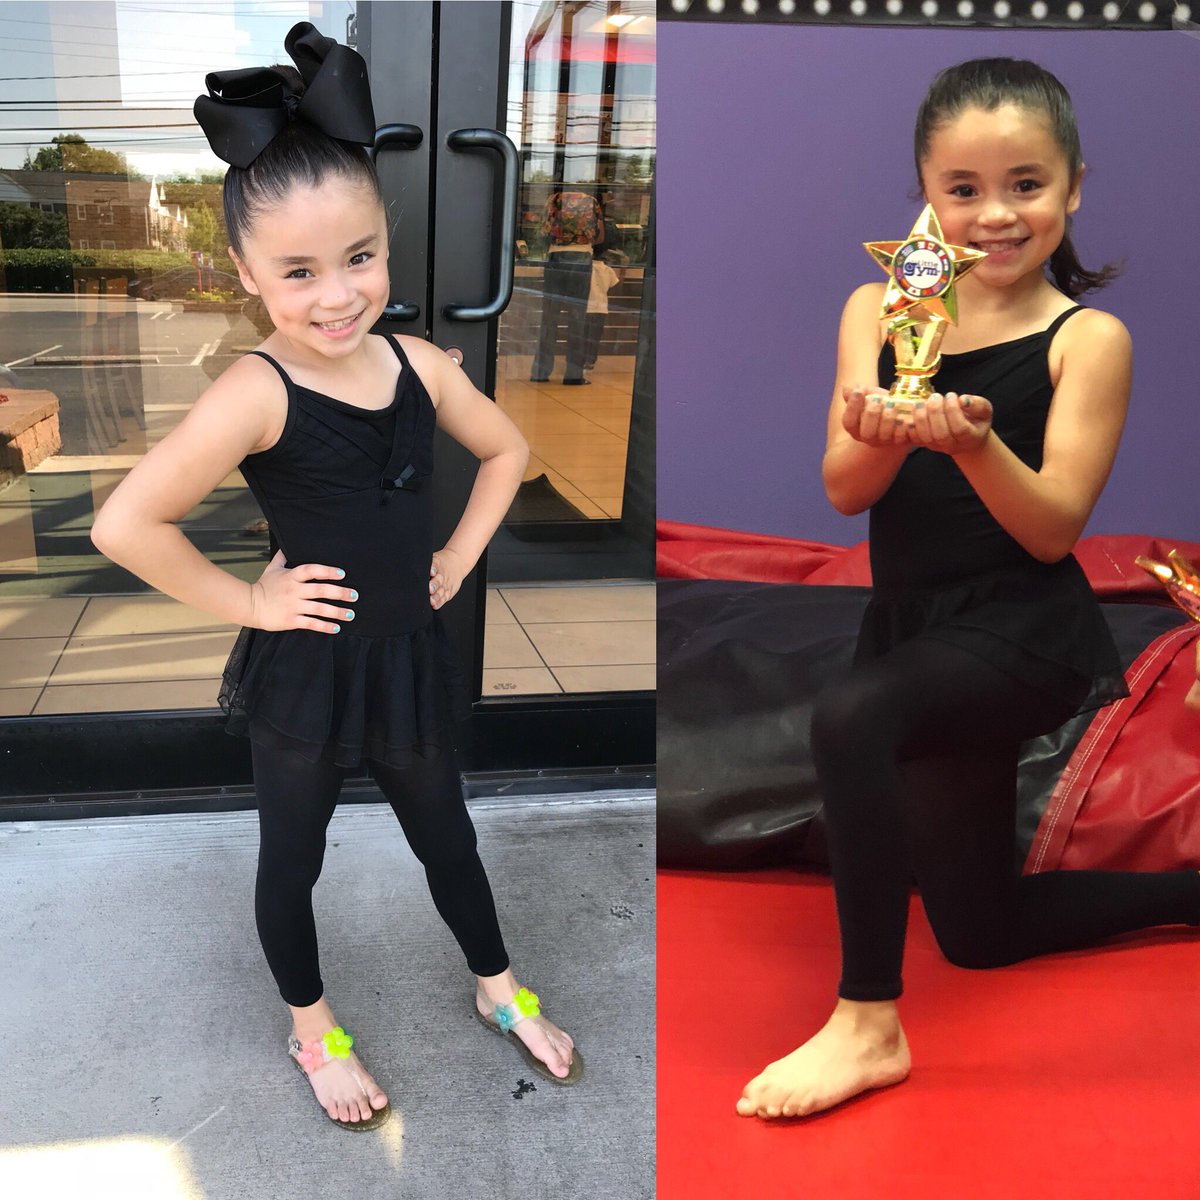 My baby killed her gymnastics showcase!!!! Very proud dad right now ☺️💪💯🤸🏻‍♀️🥇🏆 #mygirlsrock #blessedfather #futureolympian 🙏🏻